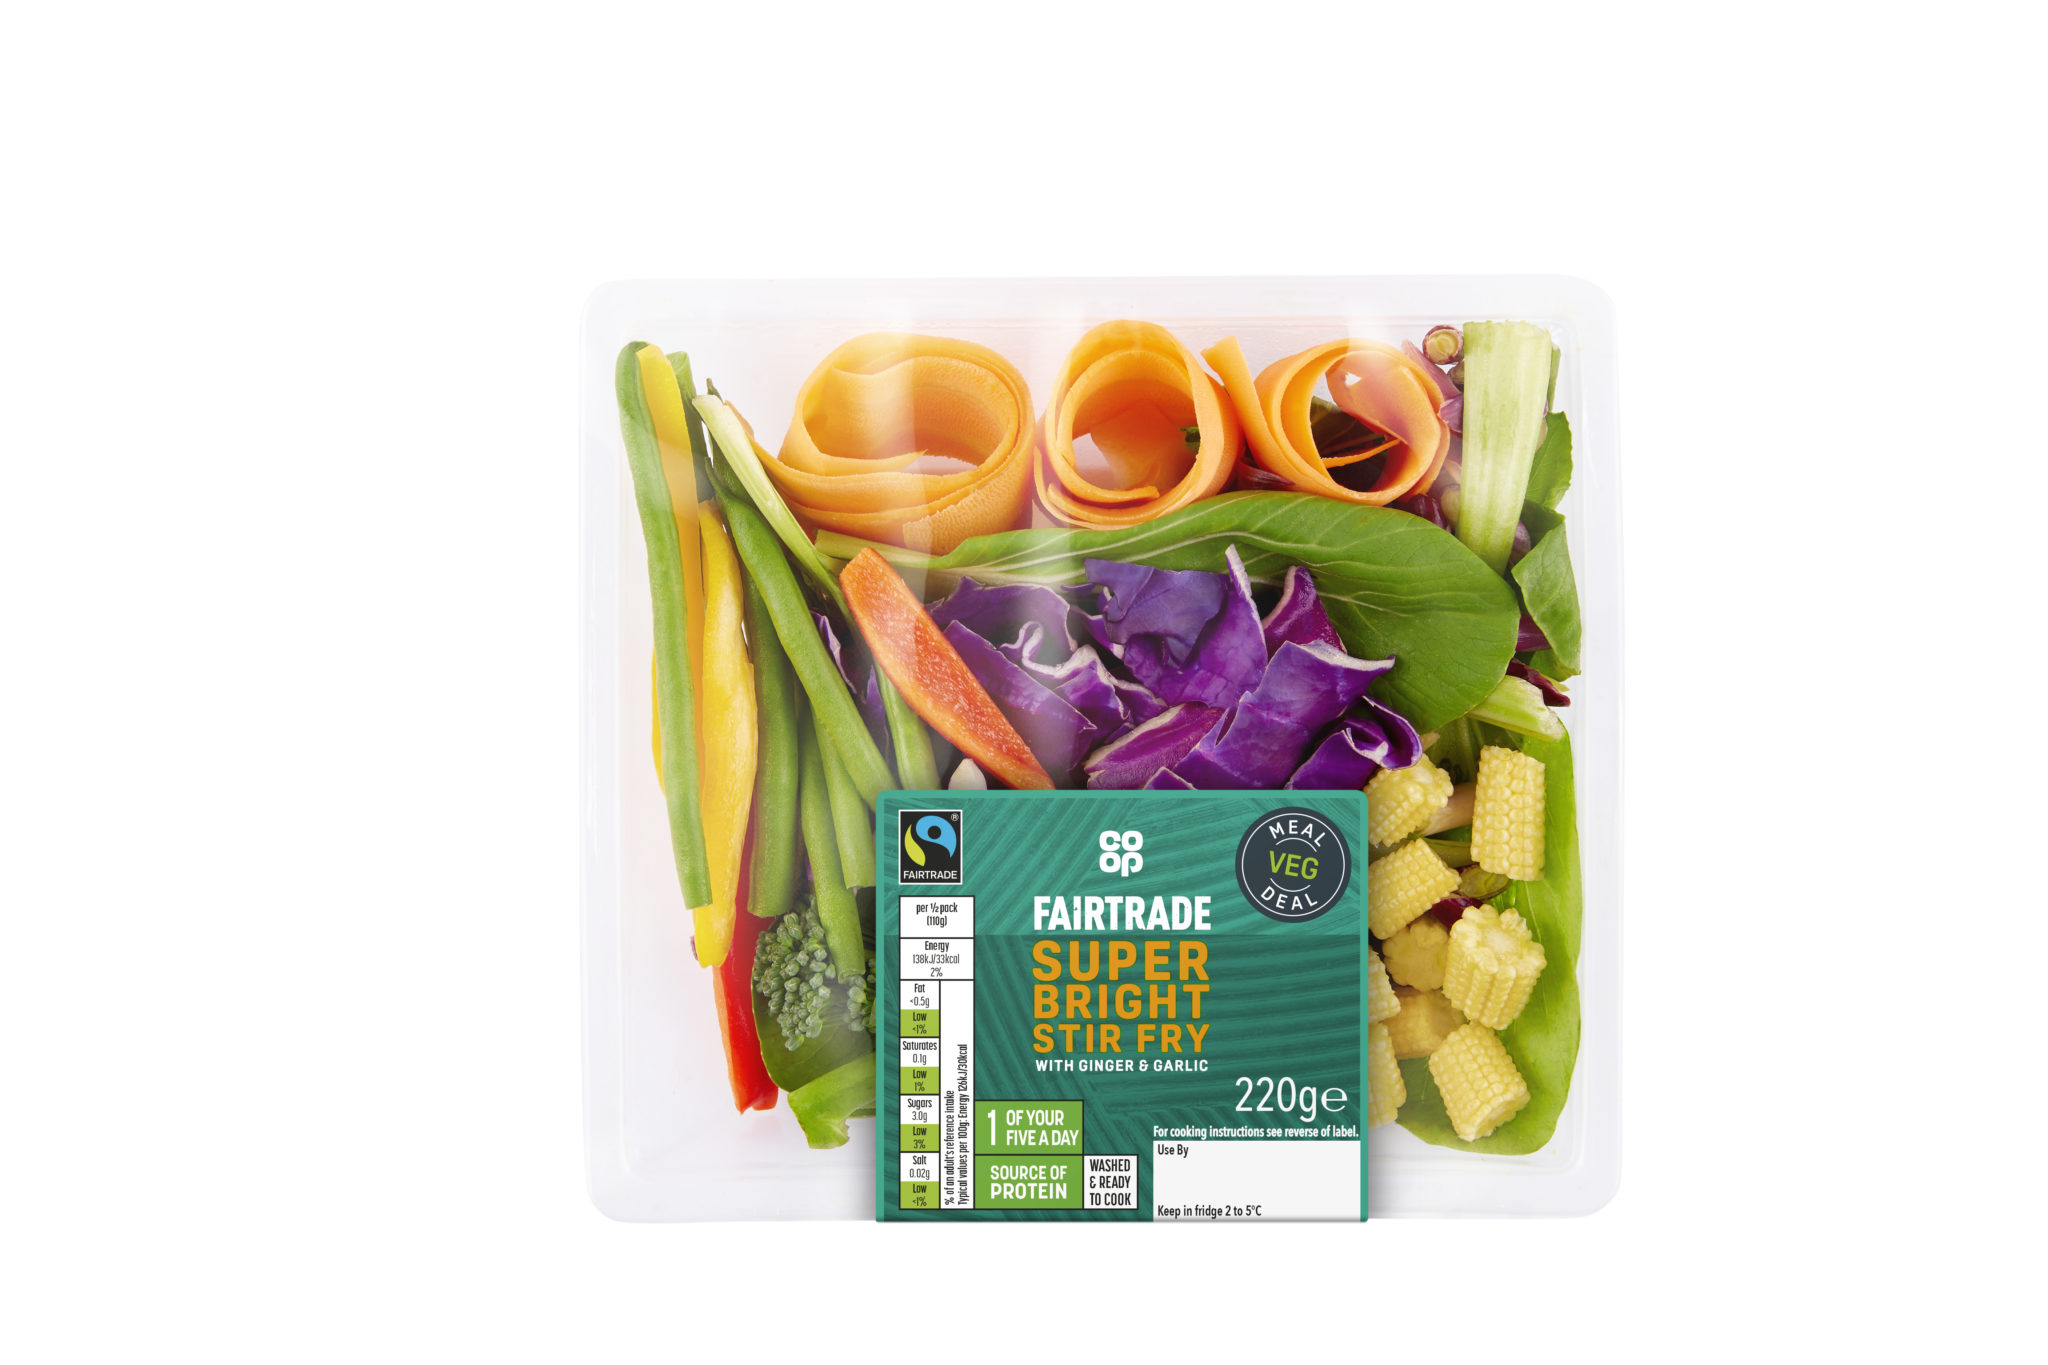 You are currently viewing CO-OP LAUNCH NEW STIR FRY MEAL DEAL WITH FAIRTRADE VEG IN A UK FIRST